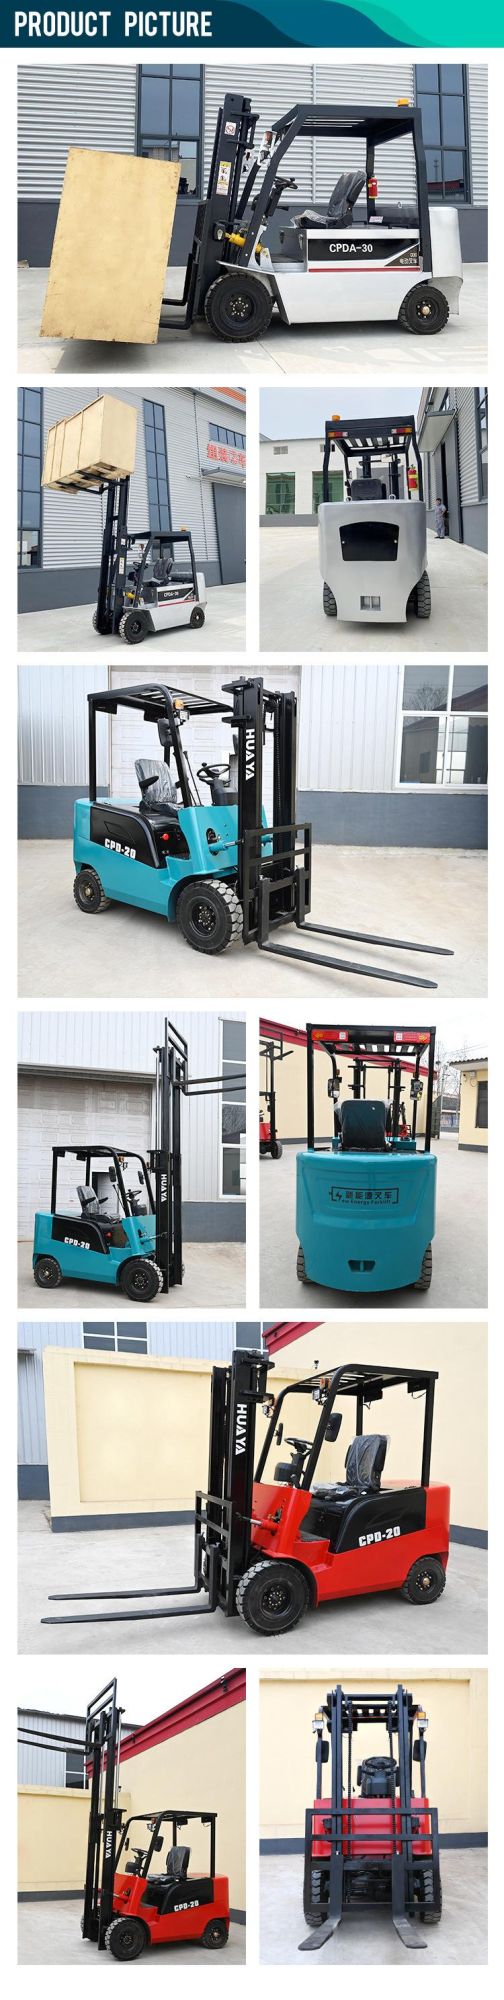 Hot Sale Huaya 2022 China for Electric New Battery Small Forklift Fb15